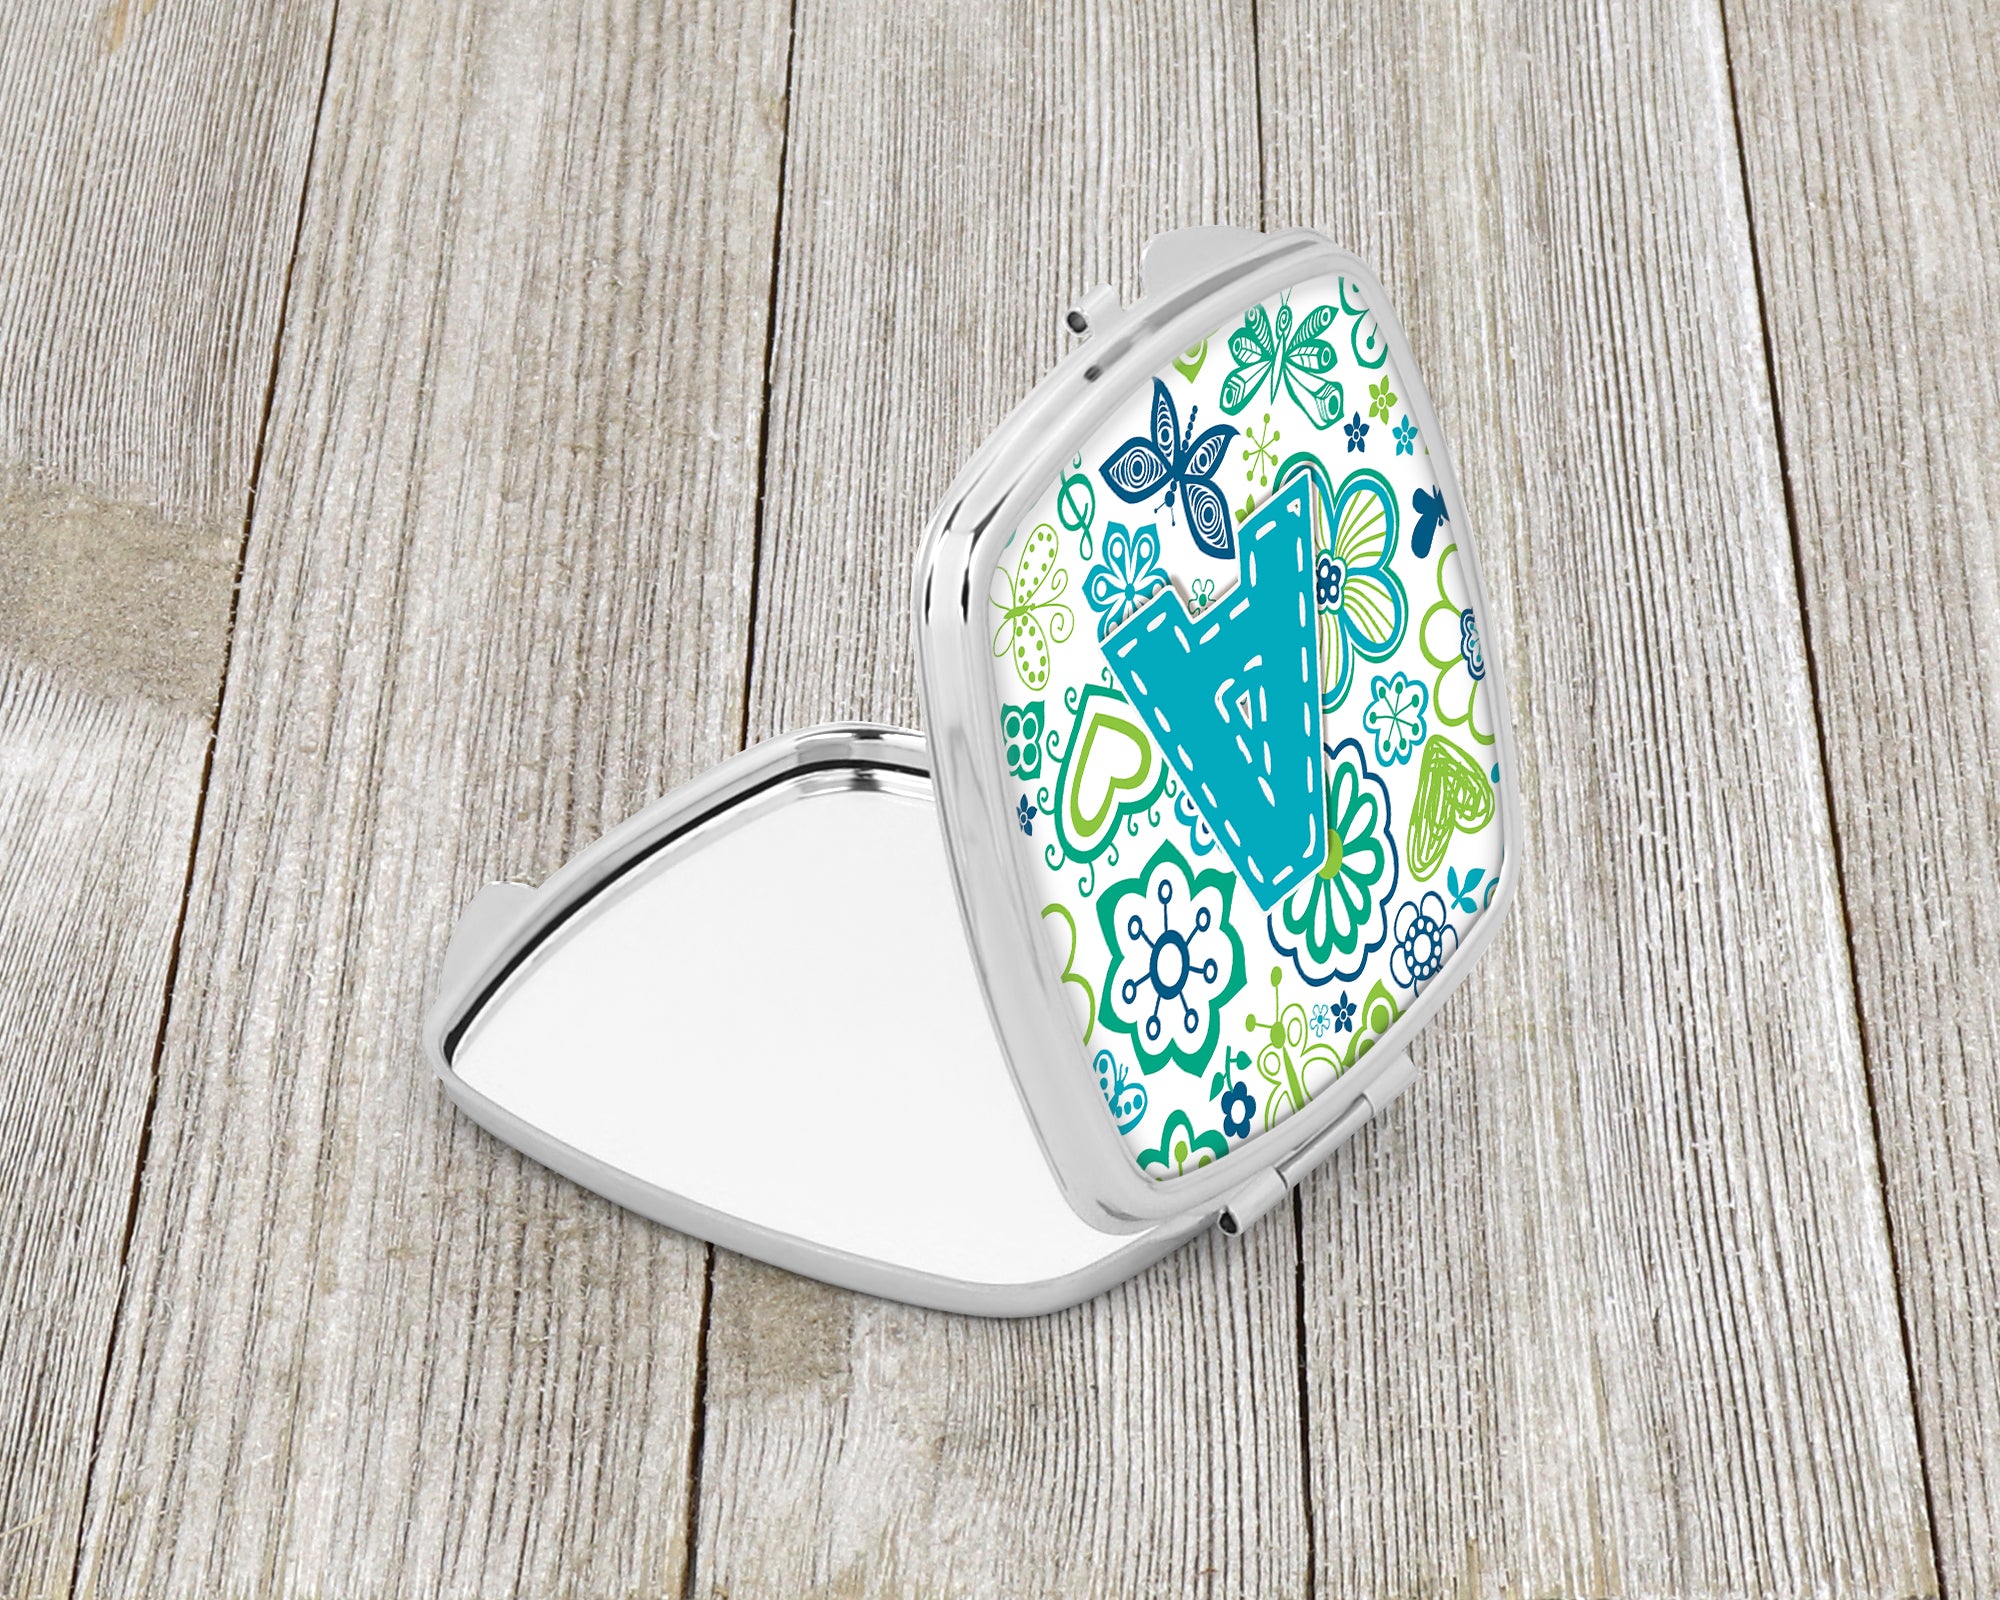 Letter A Flowers and Butterflies Teal Blue Compact Mirror CJ2006-ASCM  the-store.com.